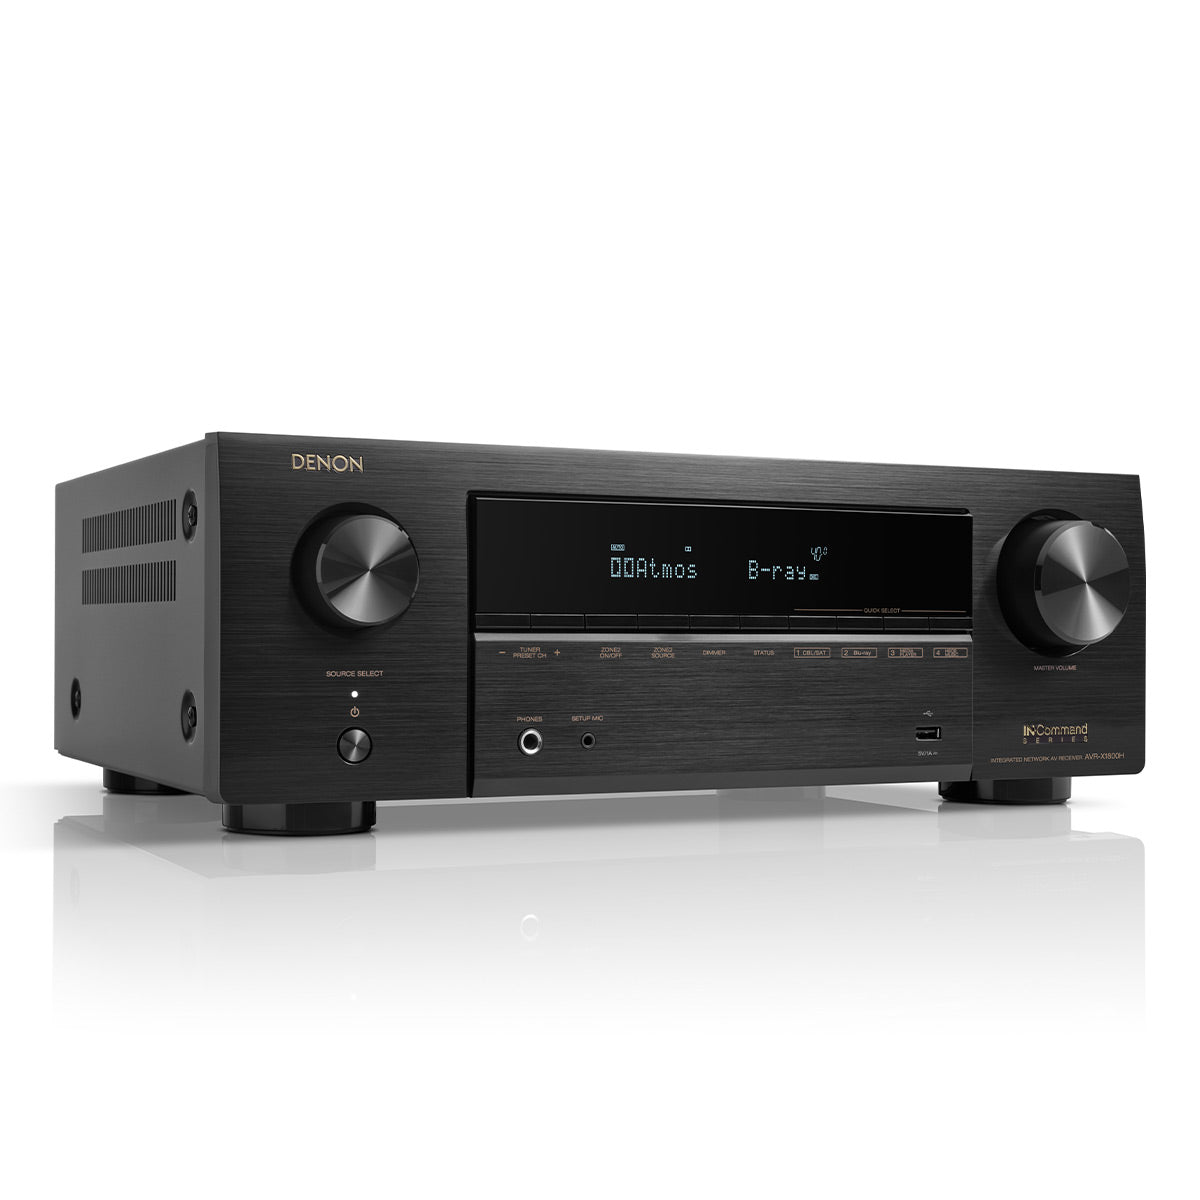 Denon AVR-X1800H 7.2 Channel 8K Home Theater Receiver with Dolby Atmos, HEOS Built-In, and Audyssey Room Correction (Factory Certified Refurbished)